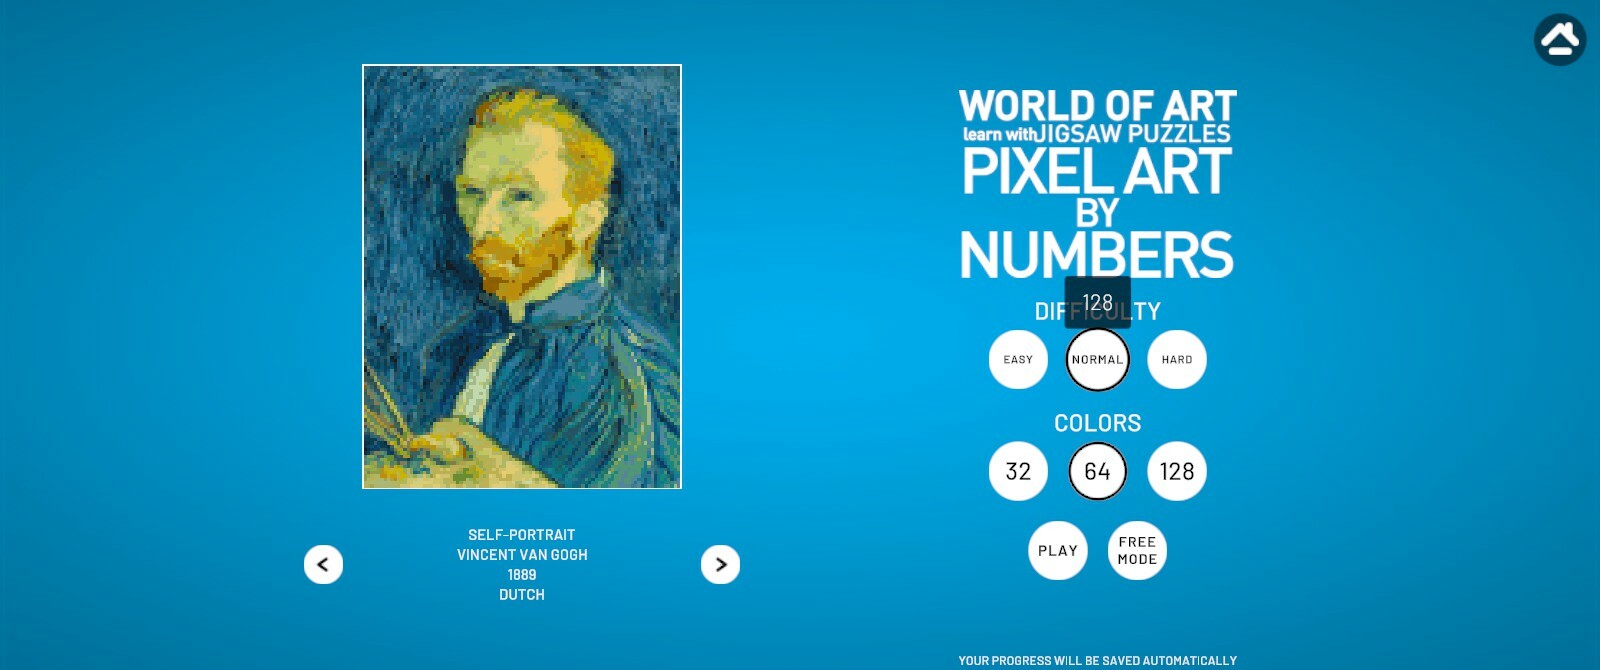 World of Art - learn with Jigsaw Puzzles: PIXEL ART BY NUMBERS Featured Screenshot #1